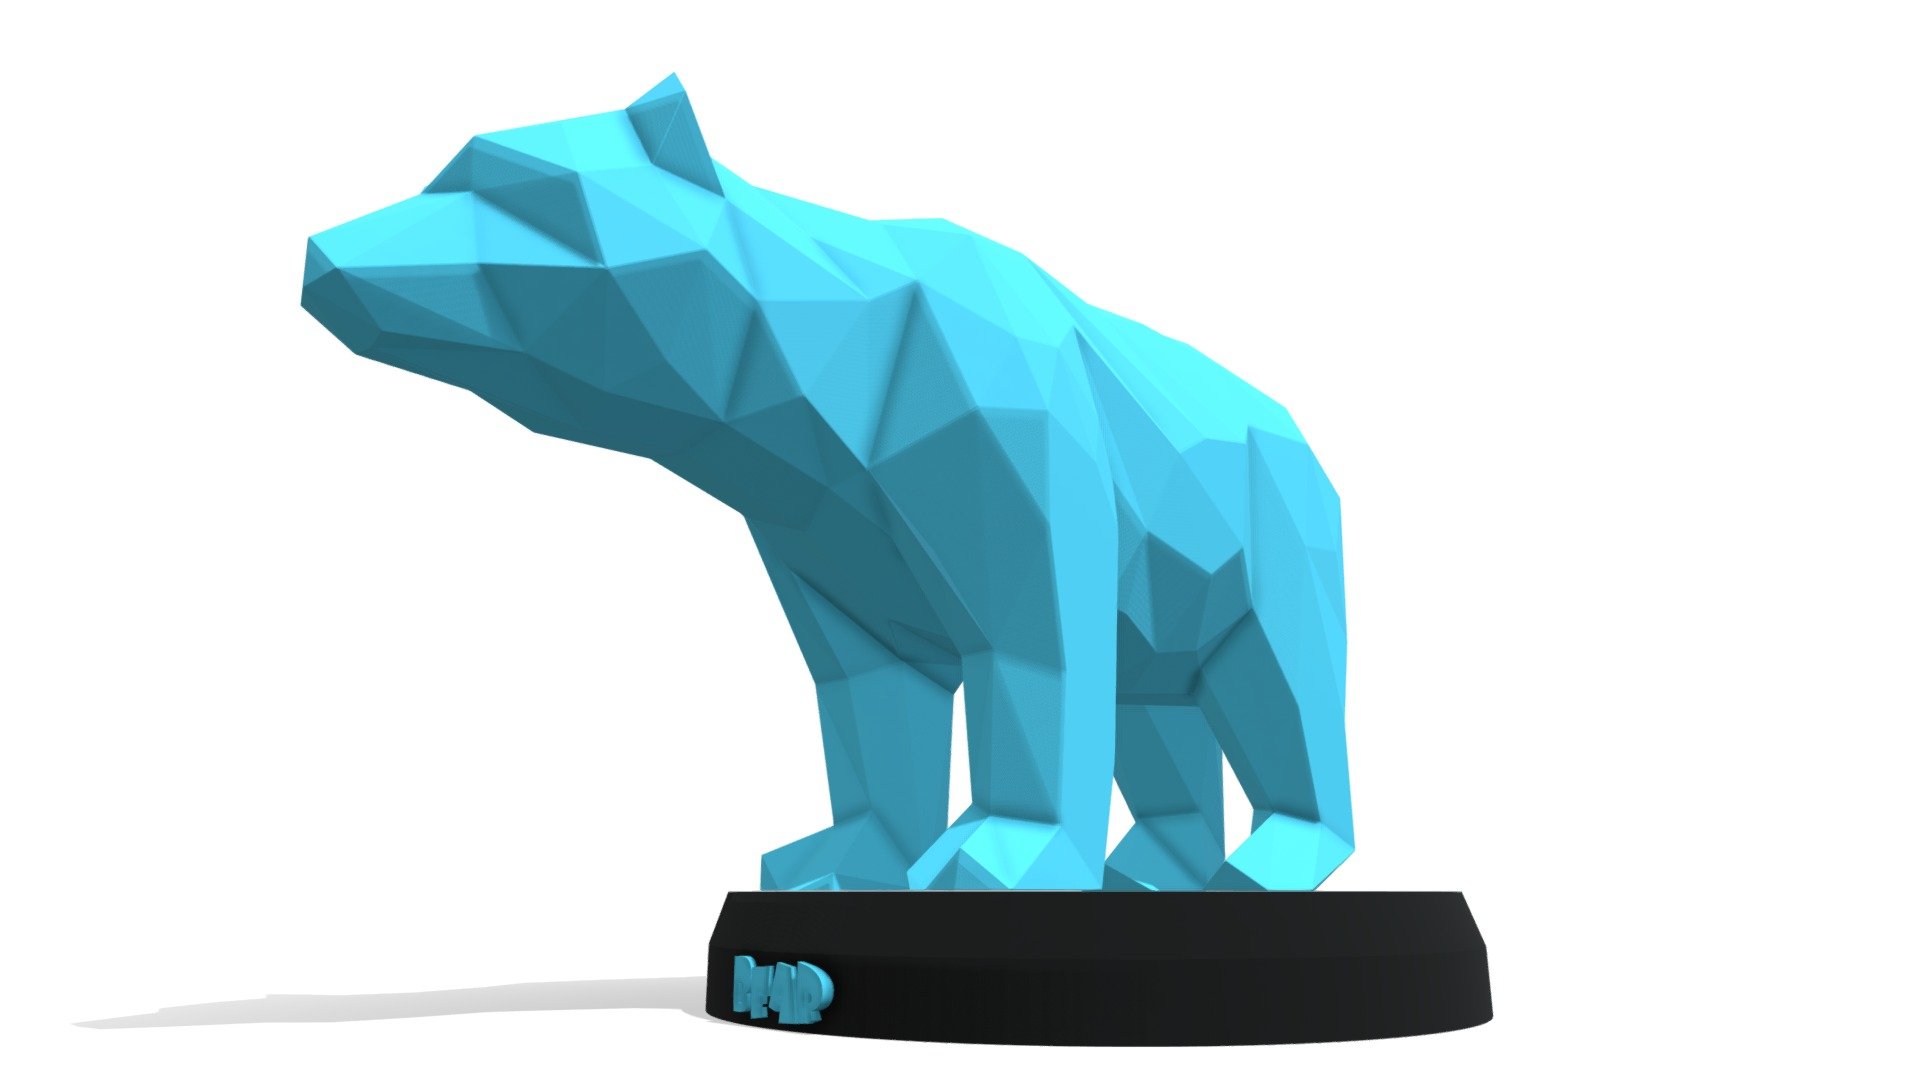 Polygonal 3D Model with Parametric modeling with gold material, make it recommend for :




Basic modeling 

Rigging 

sculpting 

Become Statue

Decorate

3D Print File

Toy

Have fun  :) - Polygonal Bear - Buy Royalty Free 3D model by Puppy3D 3d model